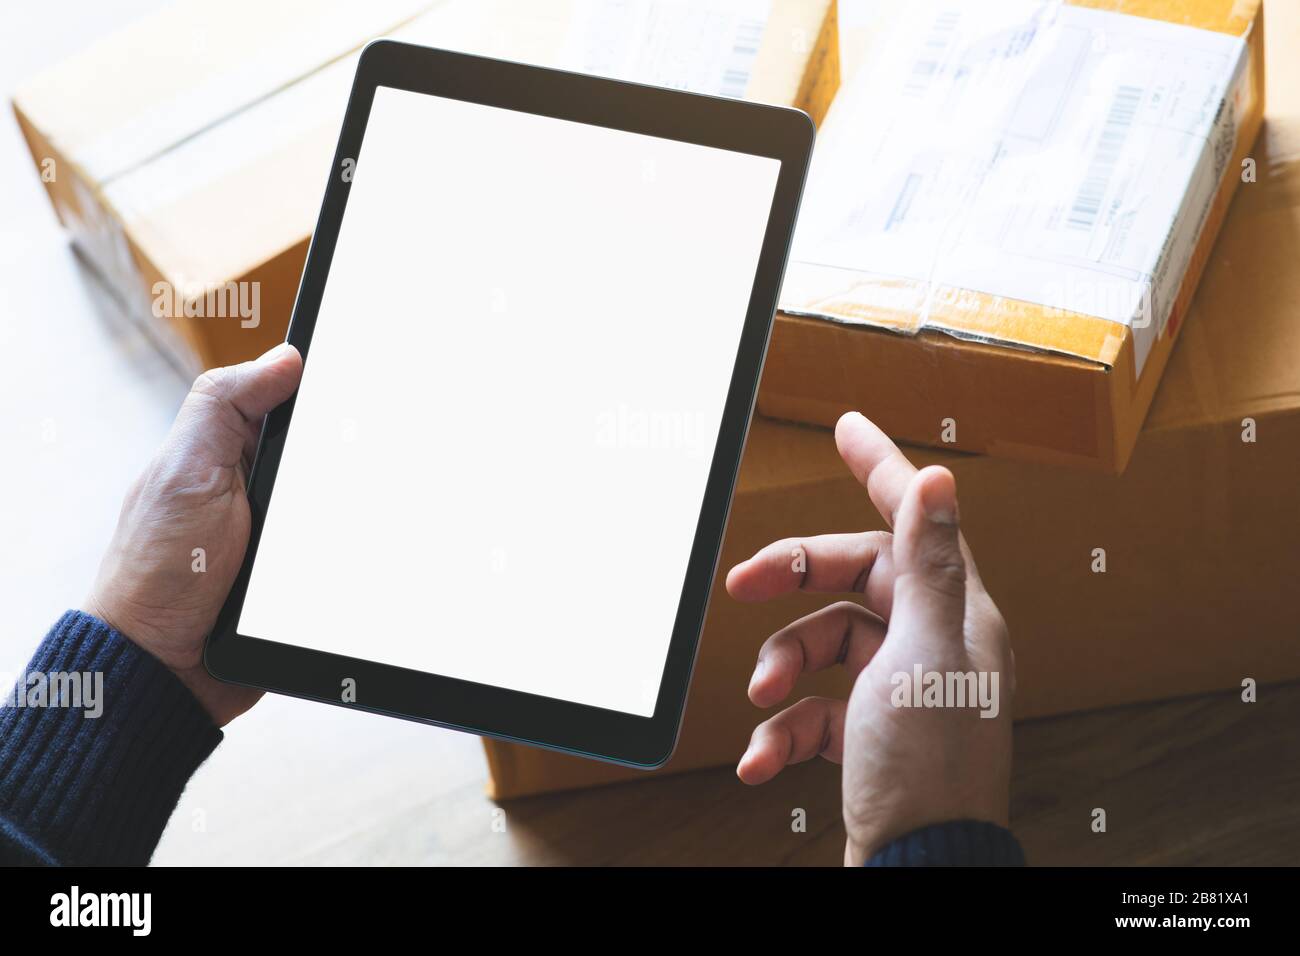 Online shopping concepts with youngman using tablet on product package box.Ecommerce market.Transportation logistic.Business retail.Seller and buyer Stock Photo